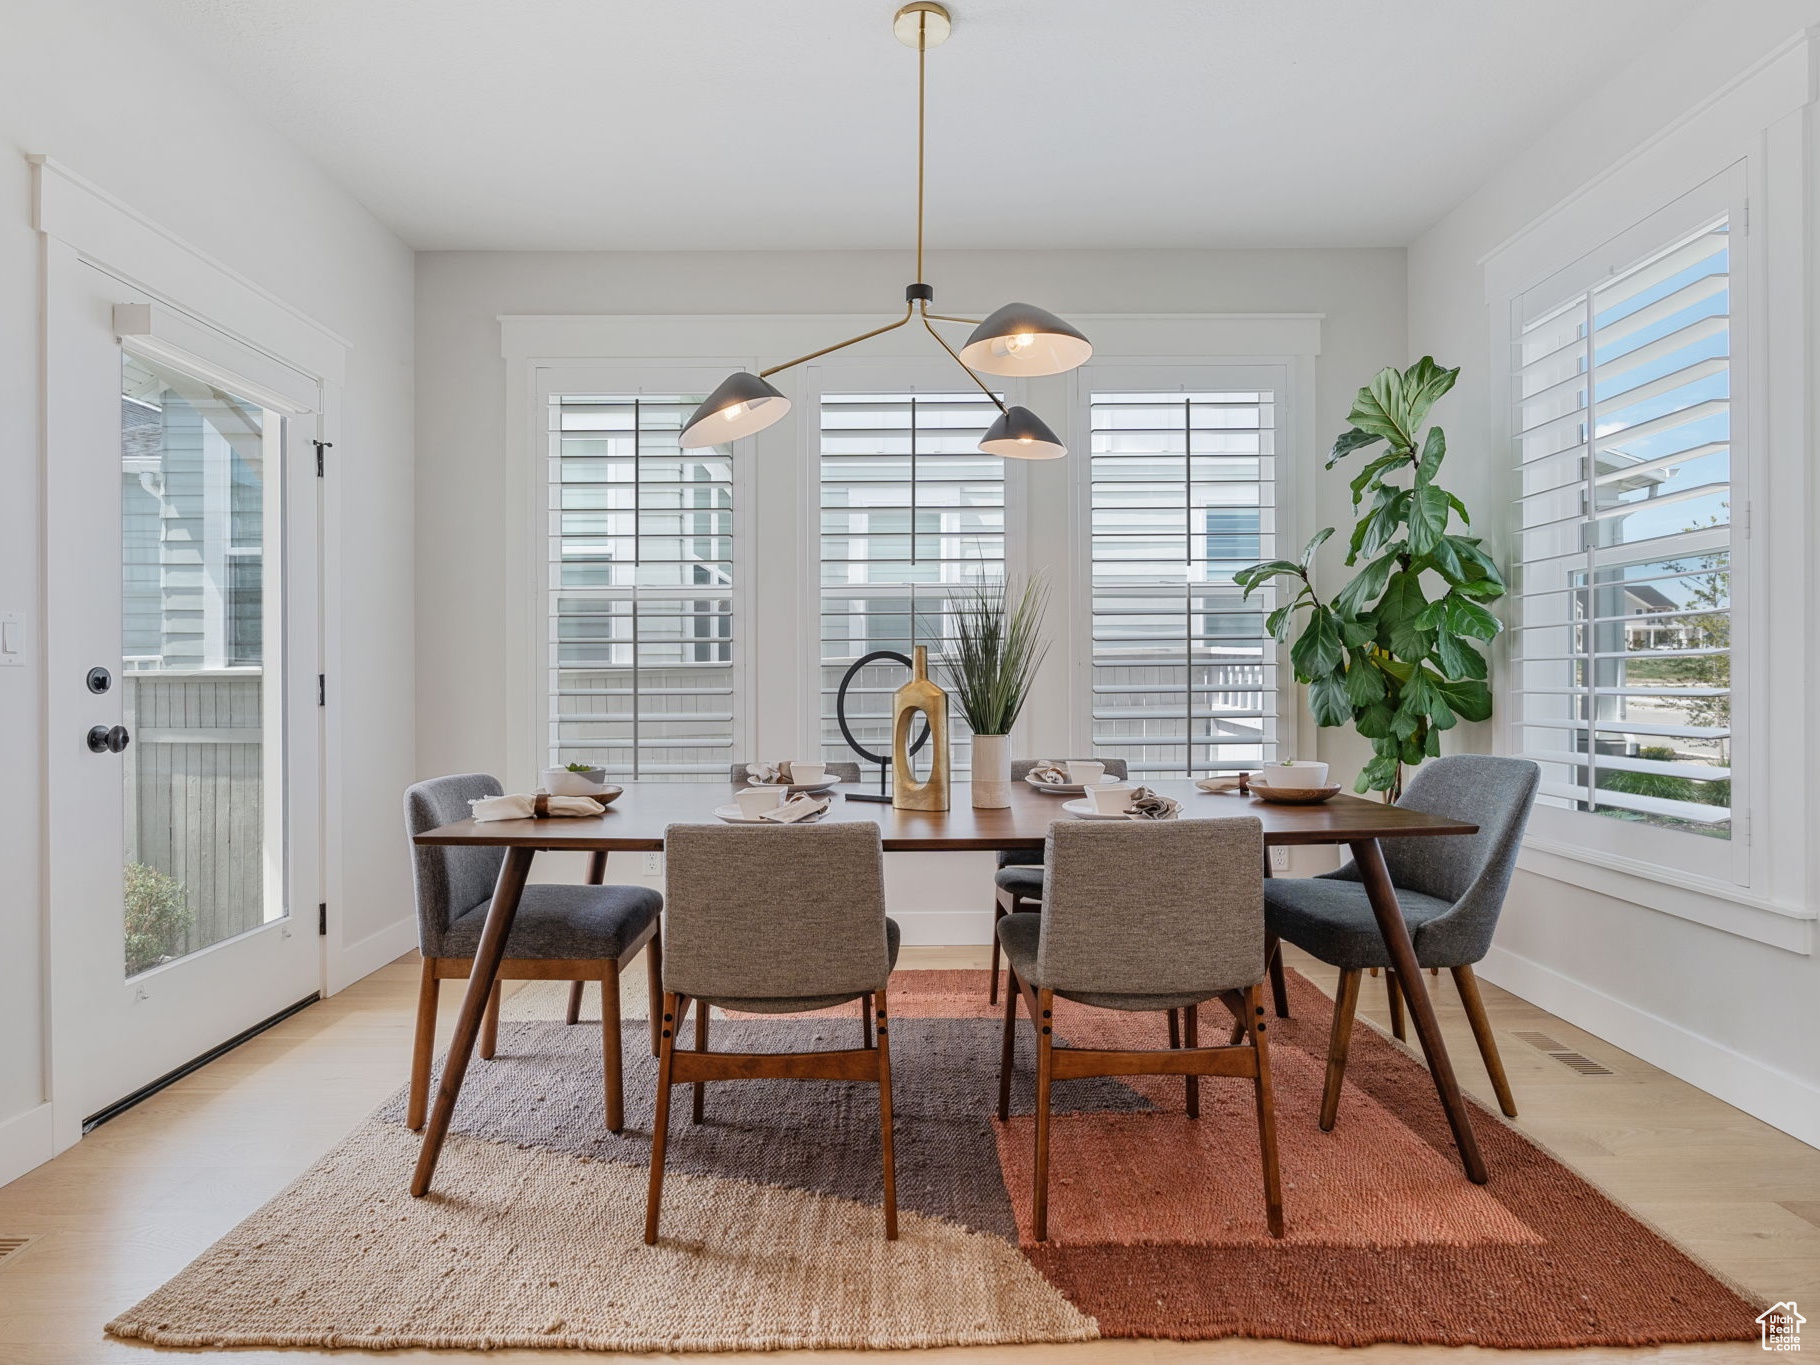 Dining space with plenty of natural light, white oak hardwood flooring, and contemporary light fixtures.